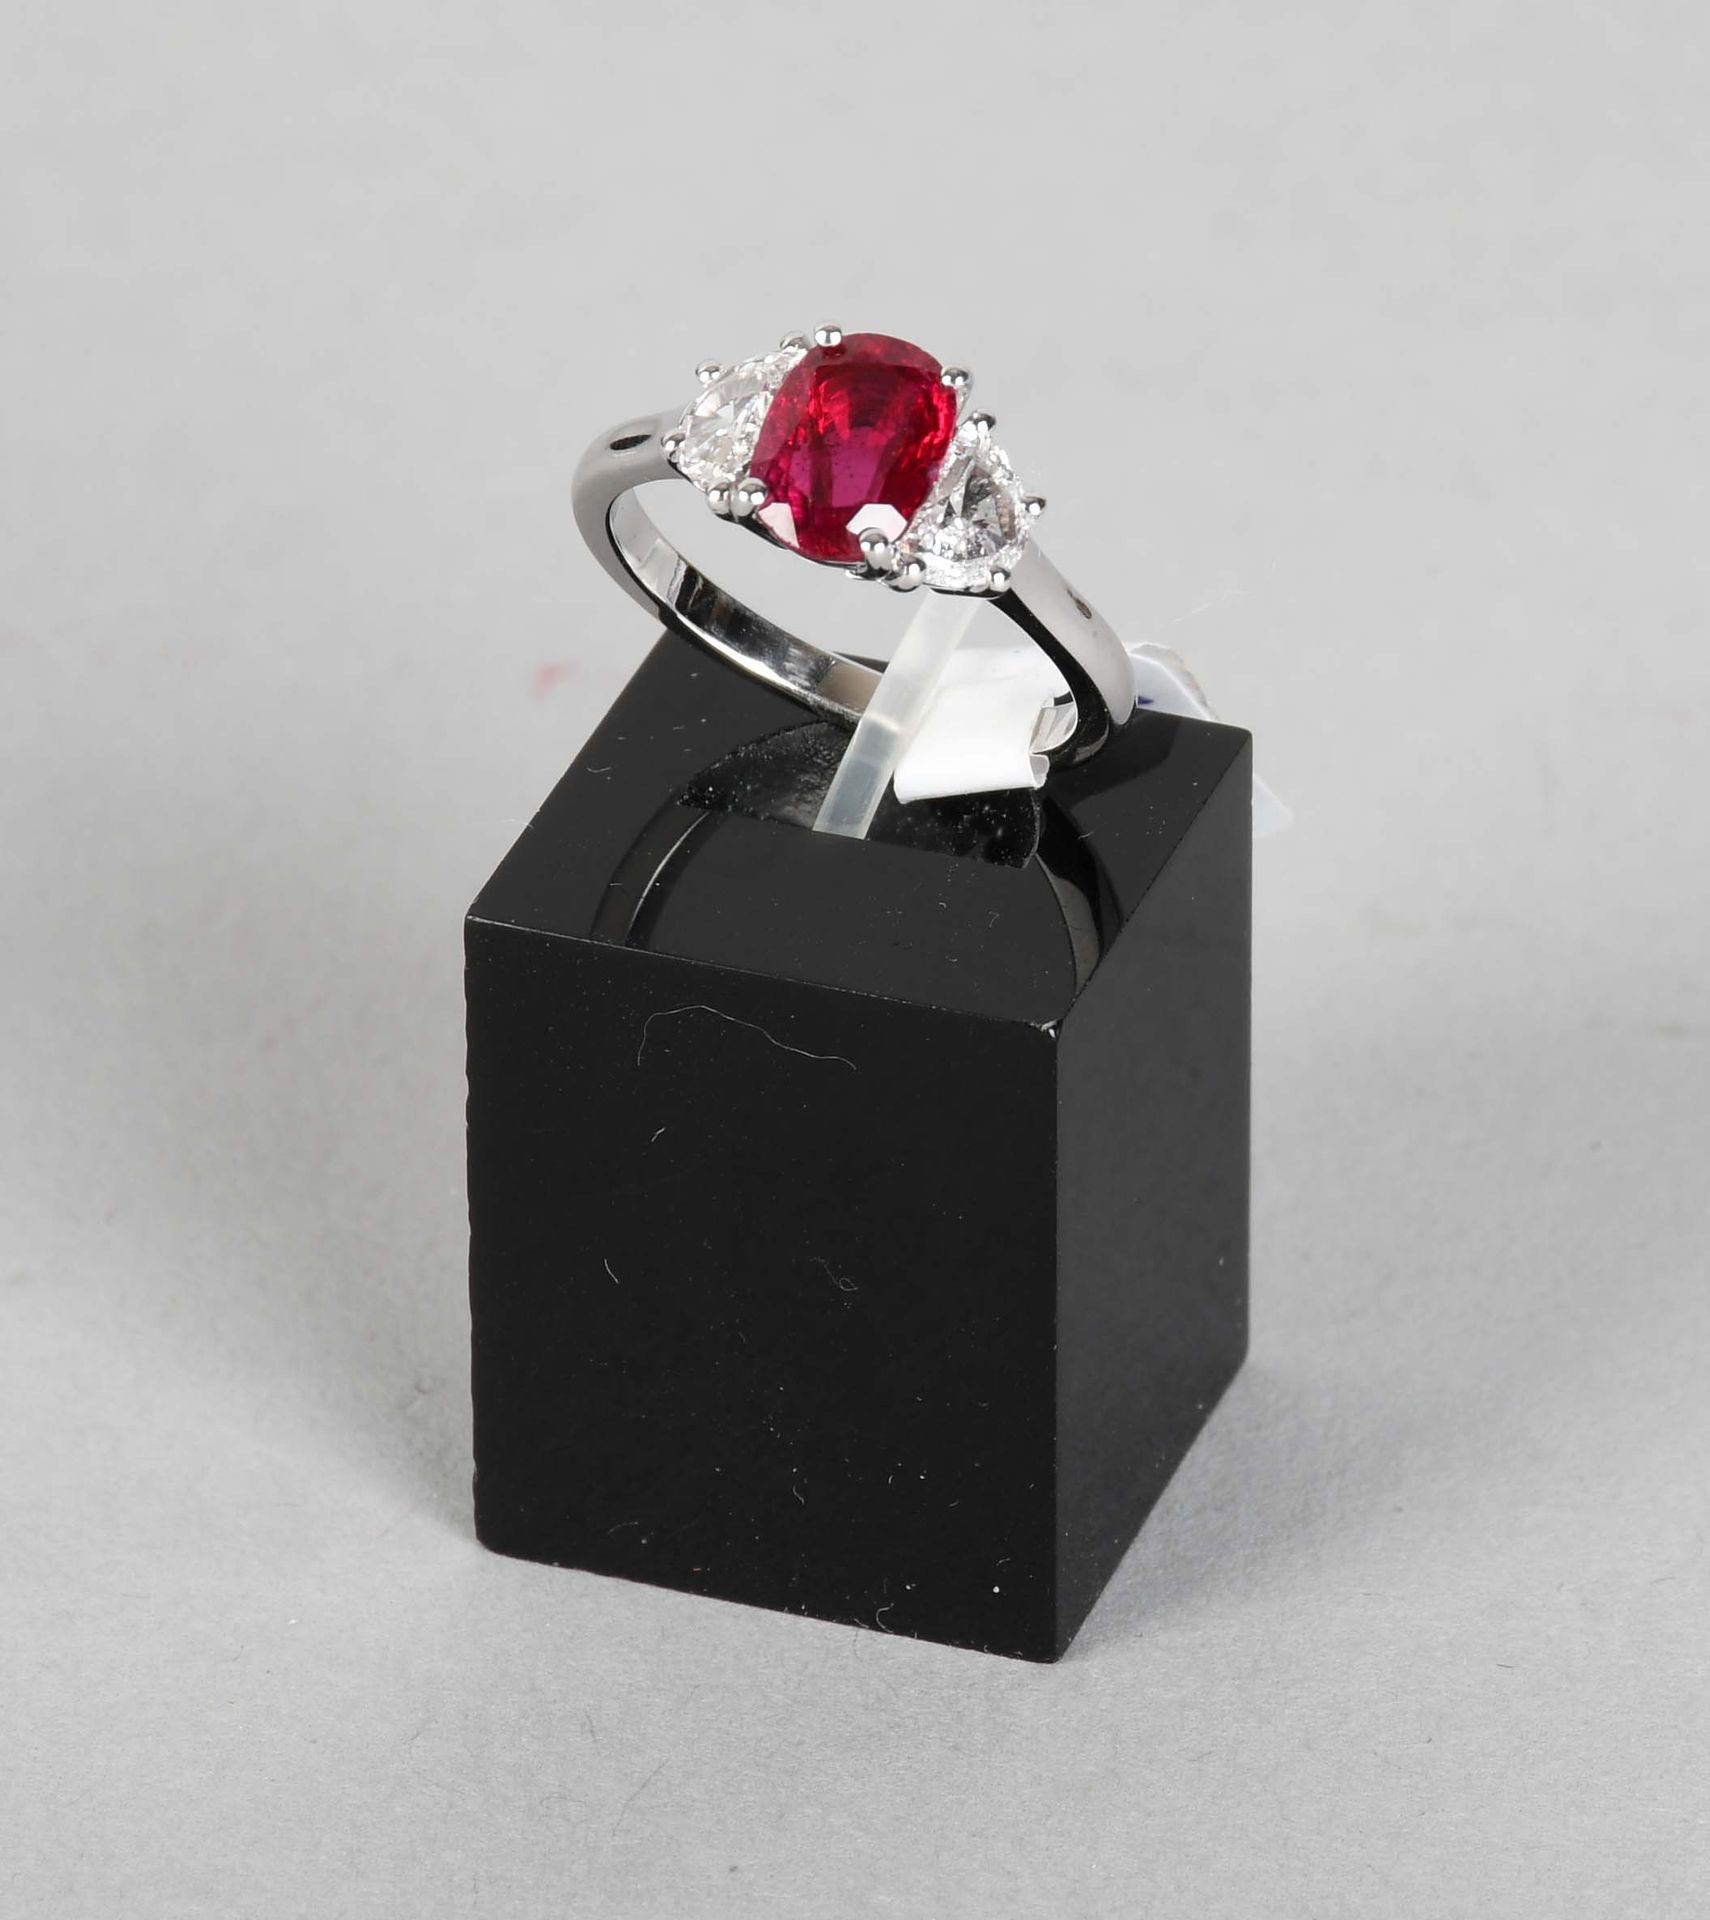 Null Jewel

Ring in eighteen karat white gold set with a natural ruby of 1.89 ca&hellip;